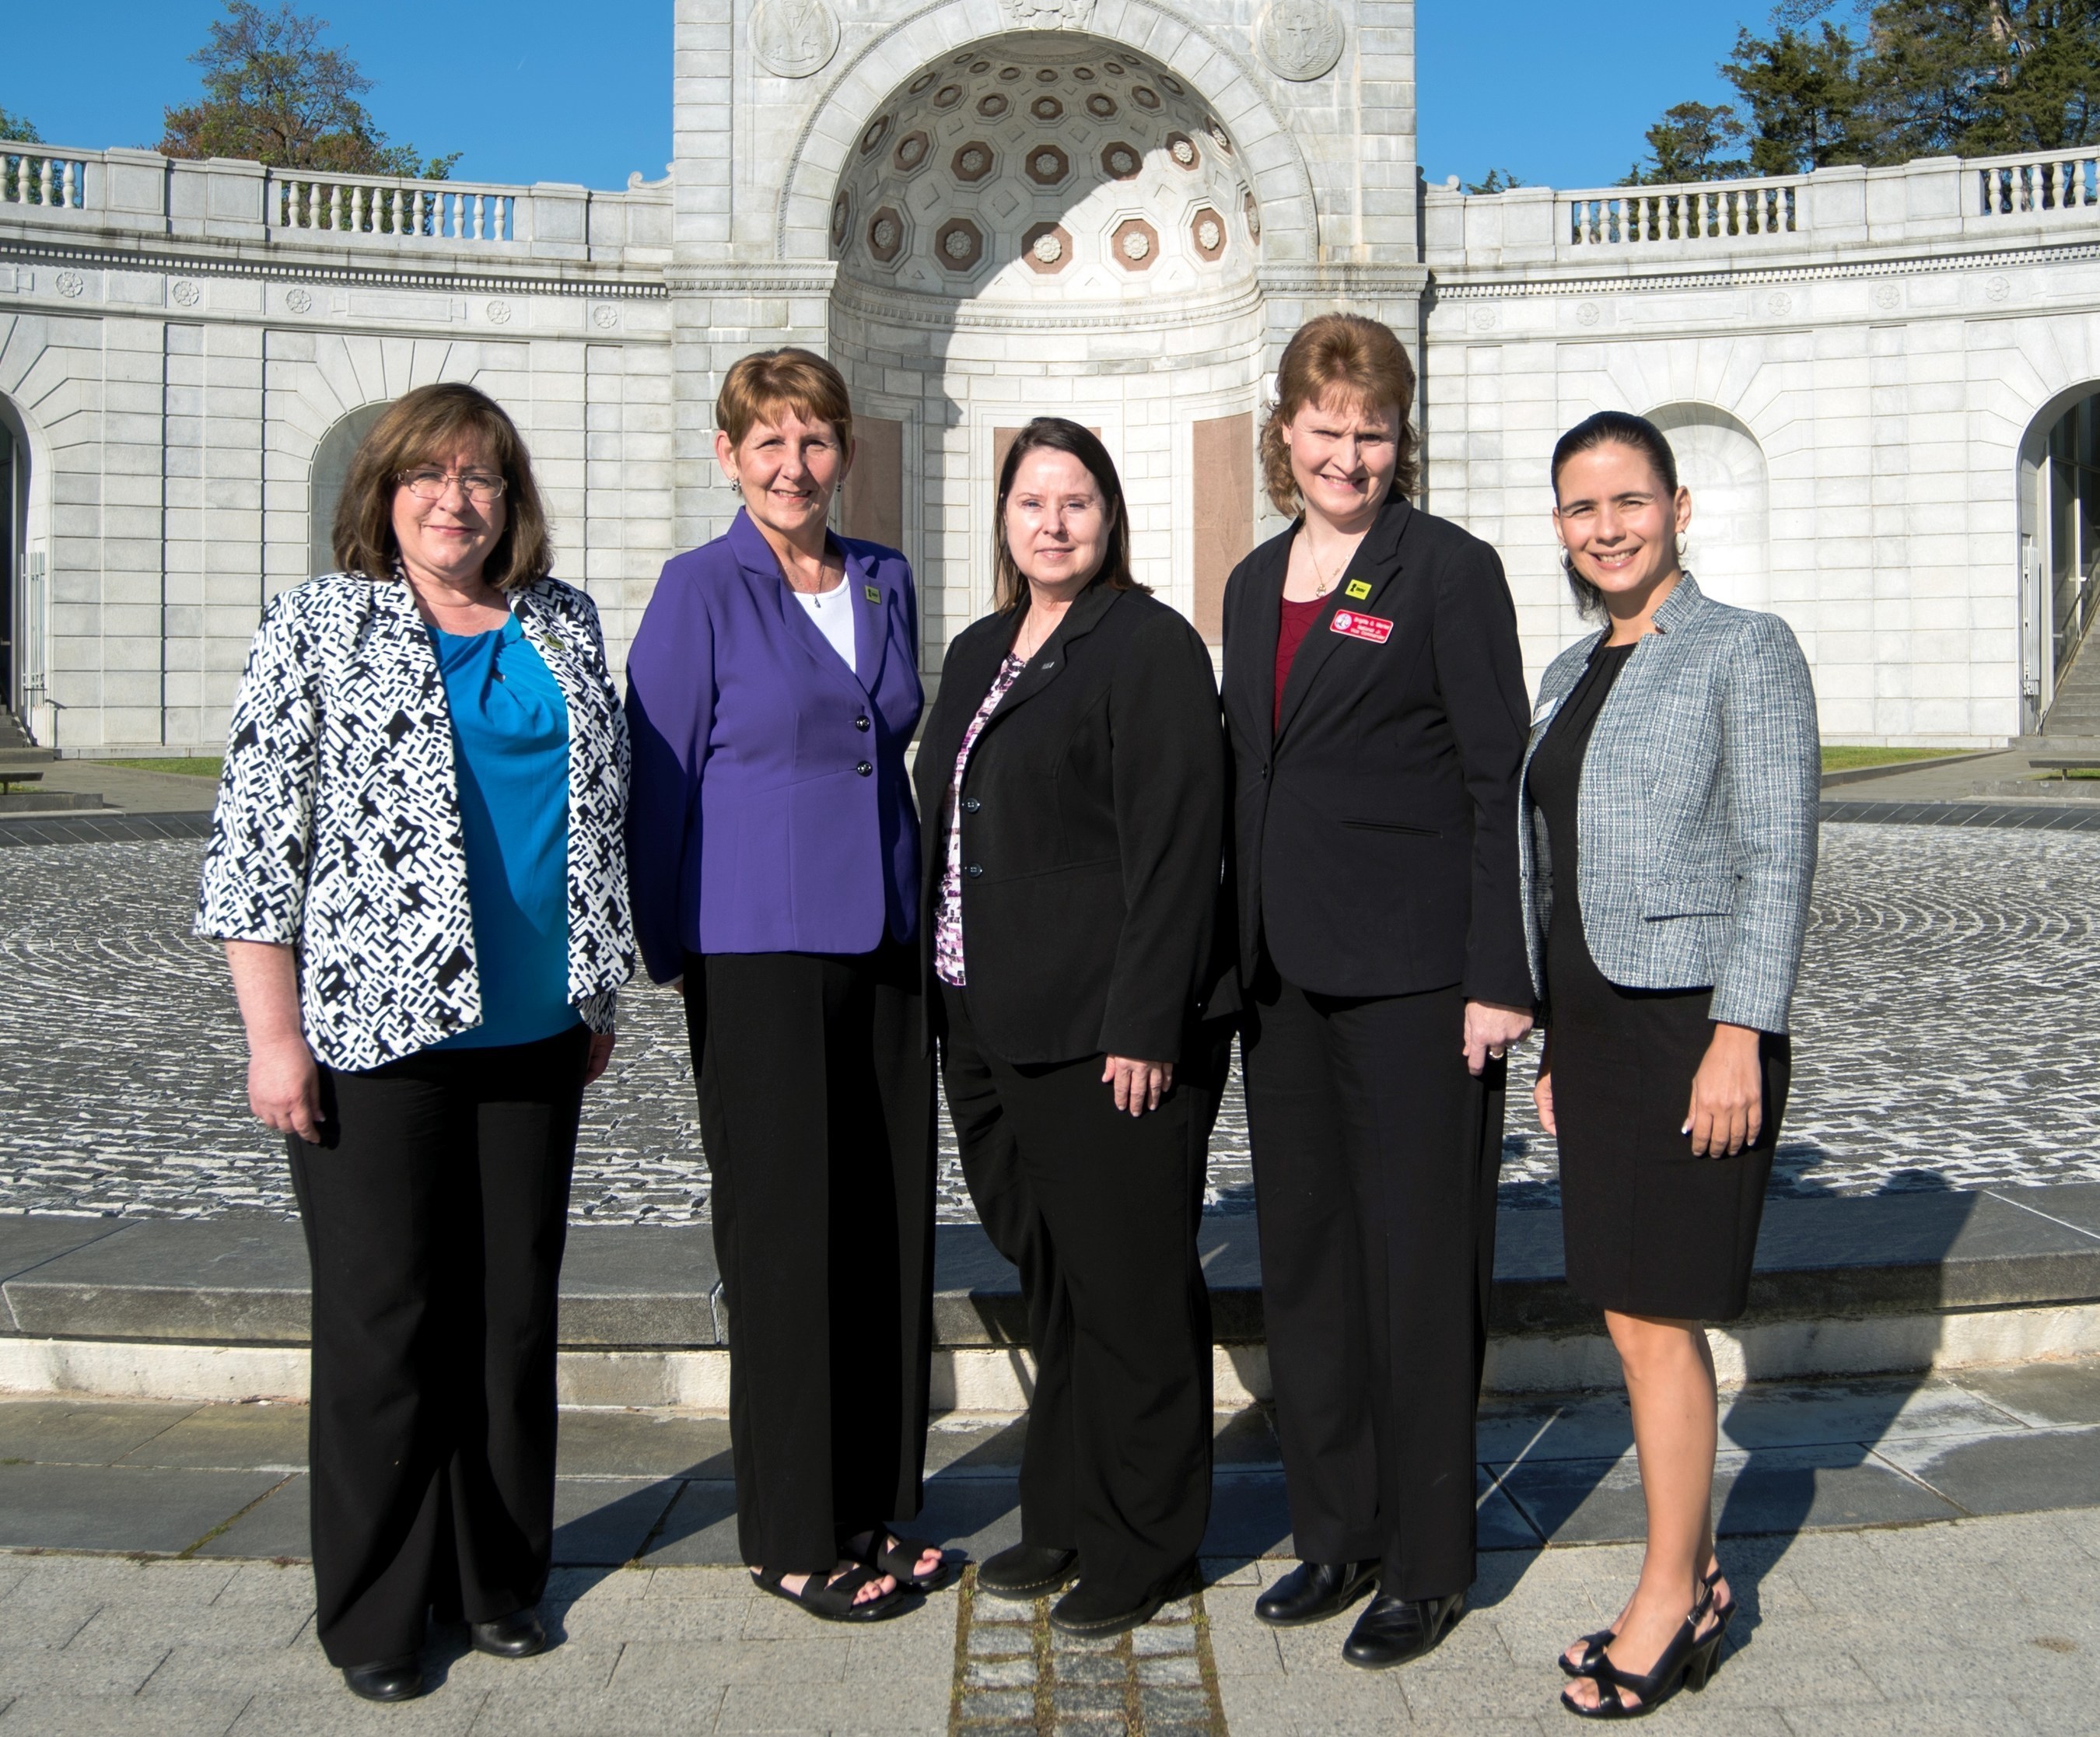 Deputy National Legislative Director Joy Ilem (center) and National 3rd Junior Vice Commander (center right) Brigitte Marker along with members of DAV's Women Veterans Interim Committee (from left) Kathleen Shultze, Kimberly Tatham and Idalis Marquez meet at the Women In Military Service for America Memorial at Arlington National Cemetery. Marker and the committee members were on Capitol Hill today to support DAV's women veterans initiatives.